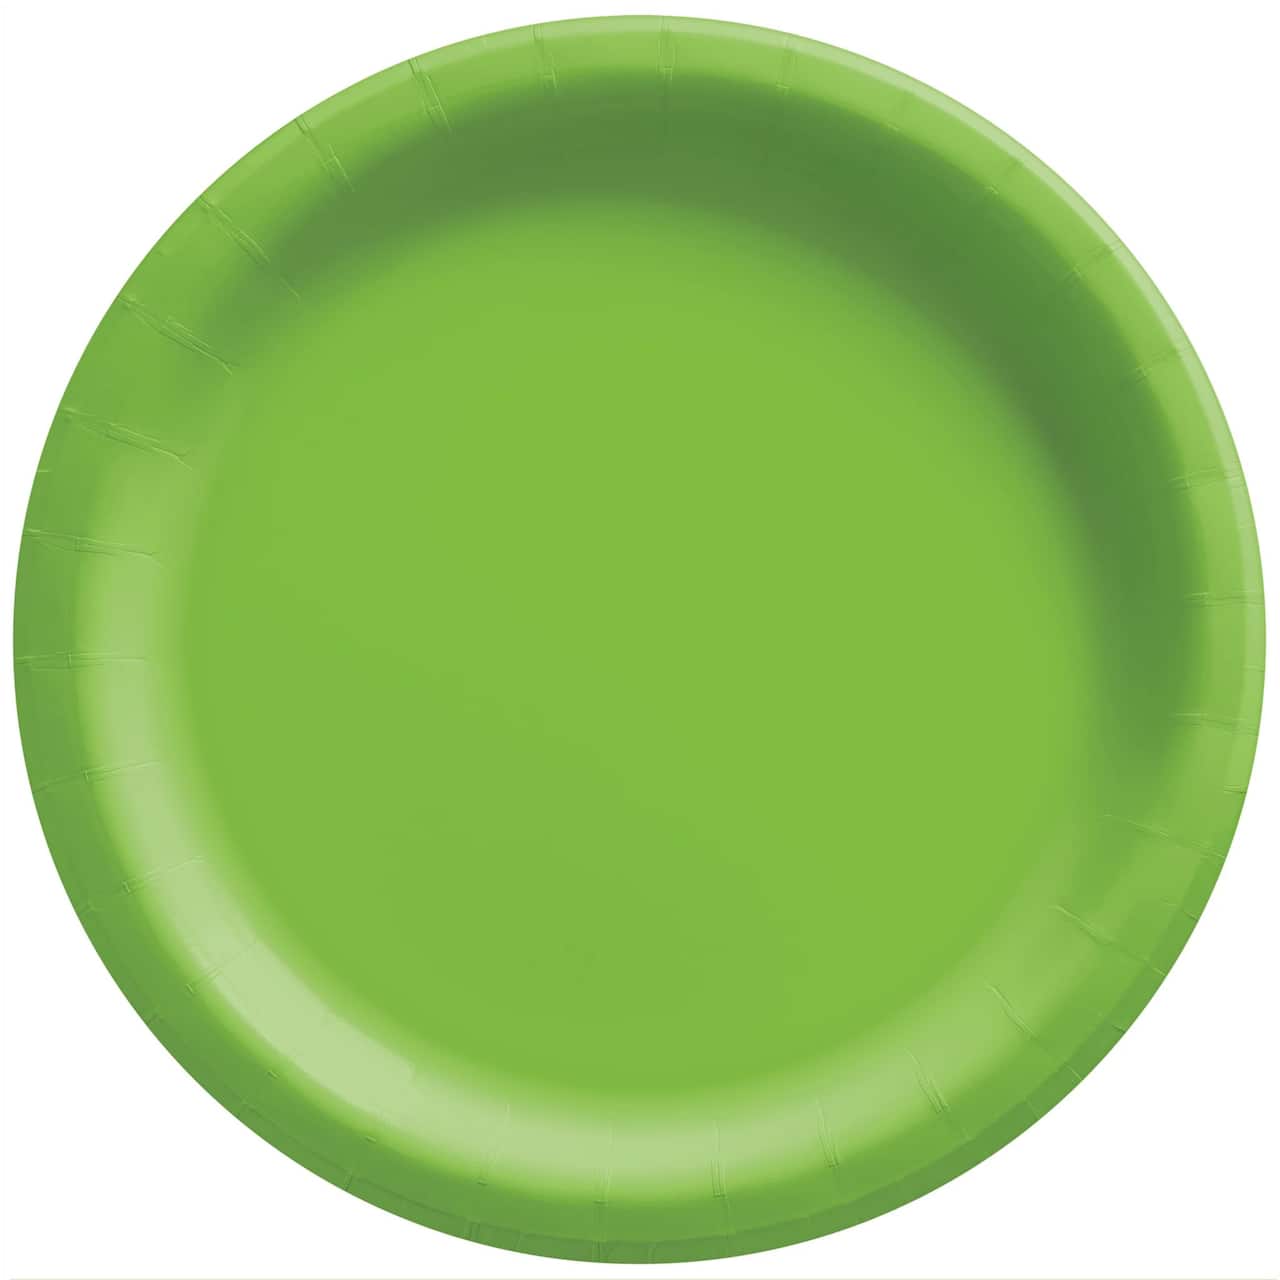 Amscan 8.5 in. x 8.5 in. Kiwi Green Round Paper Plates (150-Piece)